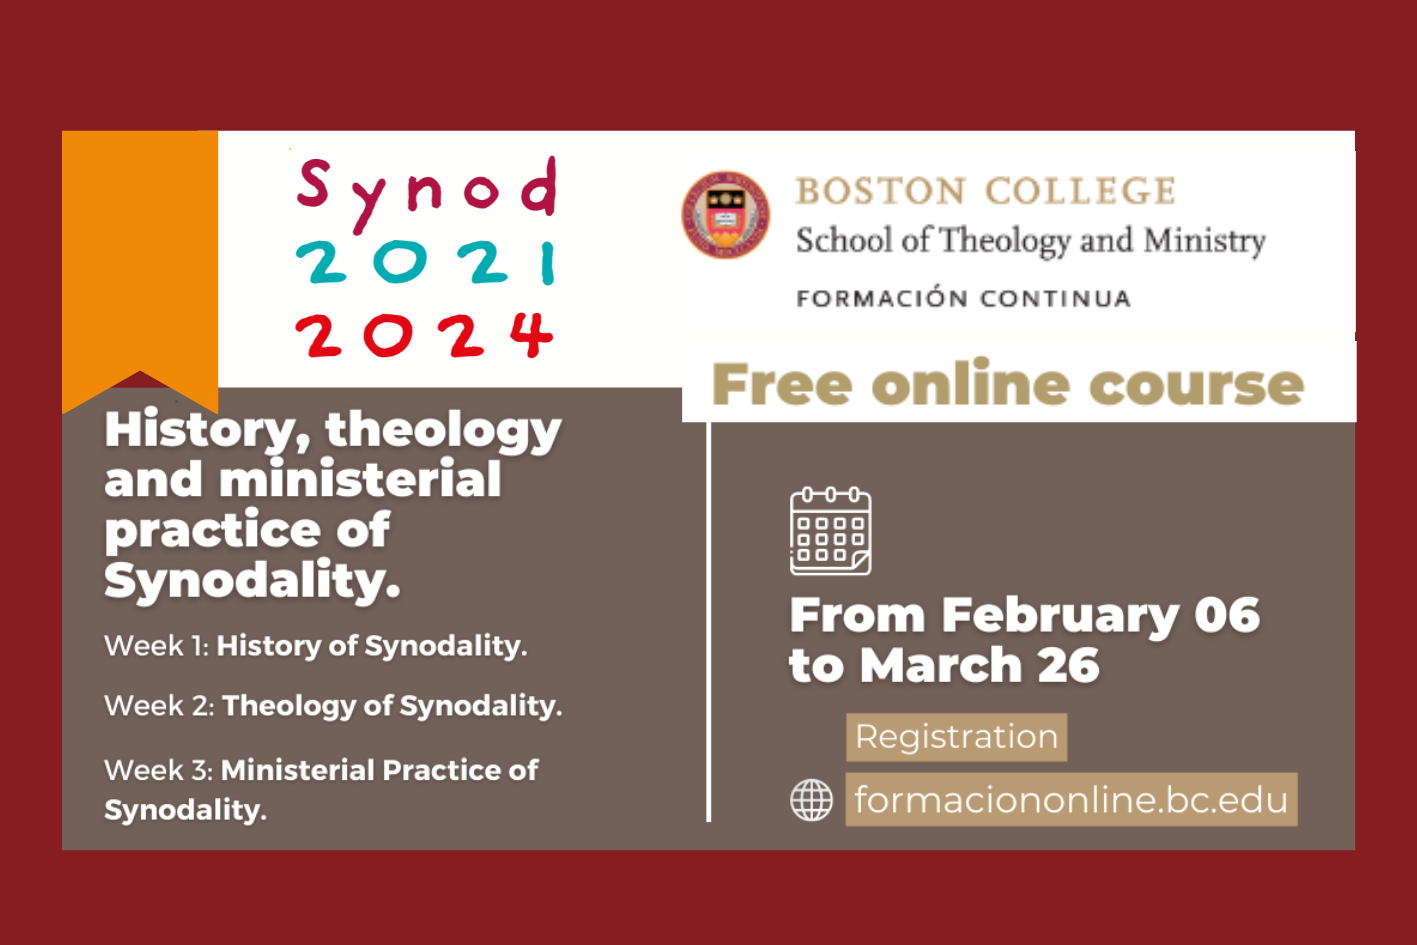 Second Intercontinental Massive Online Course (MOOC): History, Theology and Practice of Synodality.